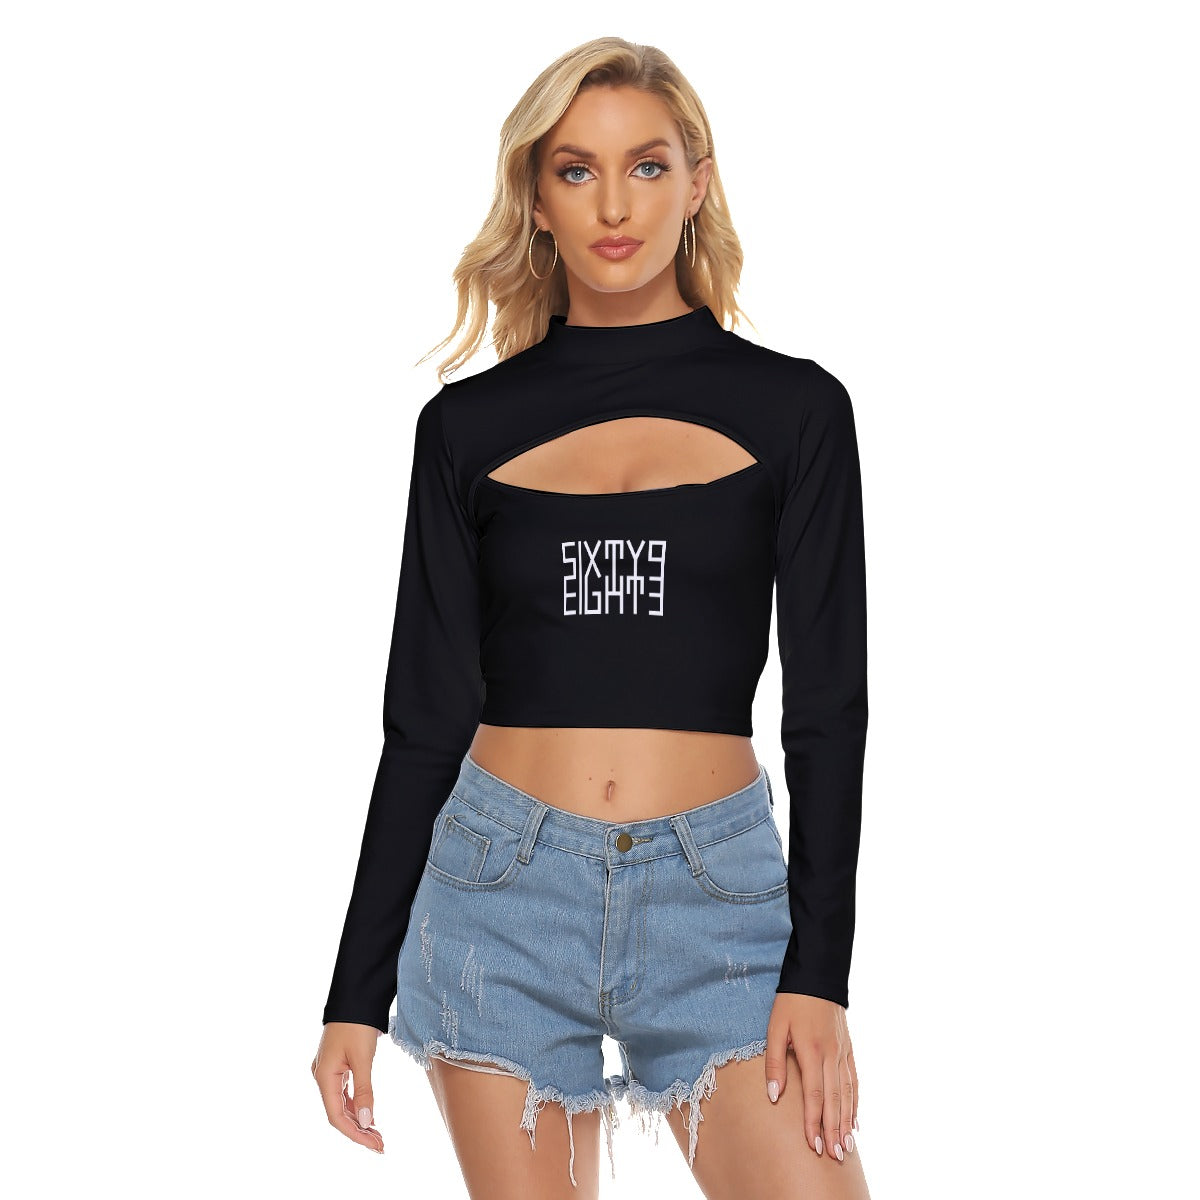 Sixty Eight 93 Logo White Black Women's Hollow Chest Keyhole Tight Crop Top